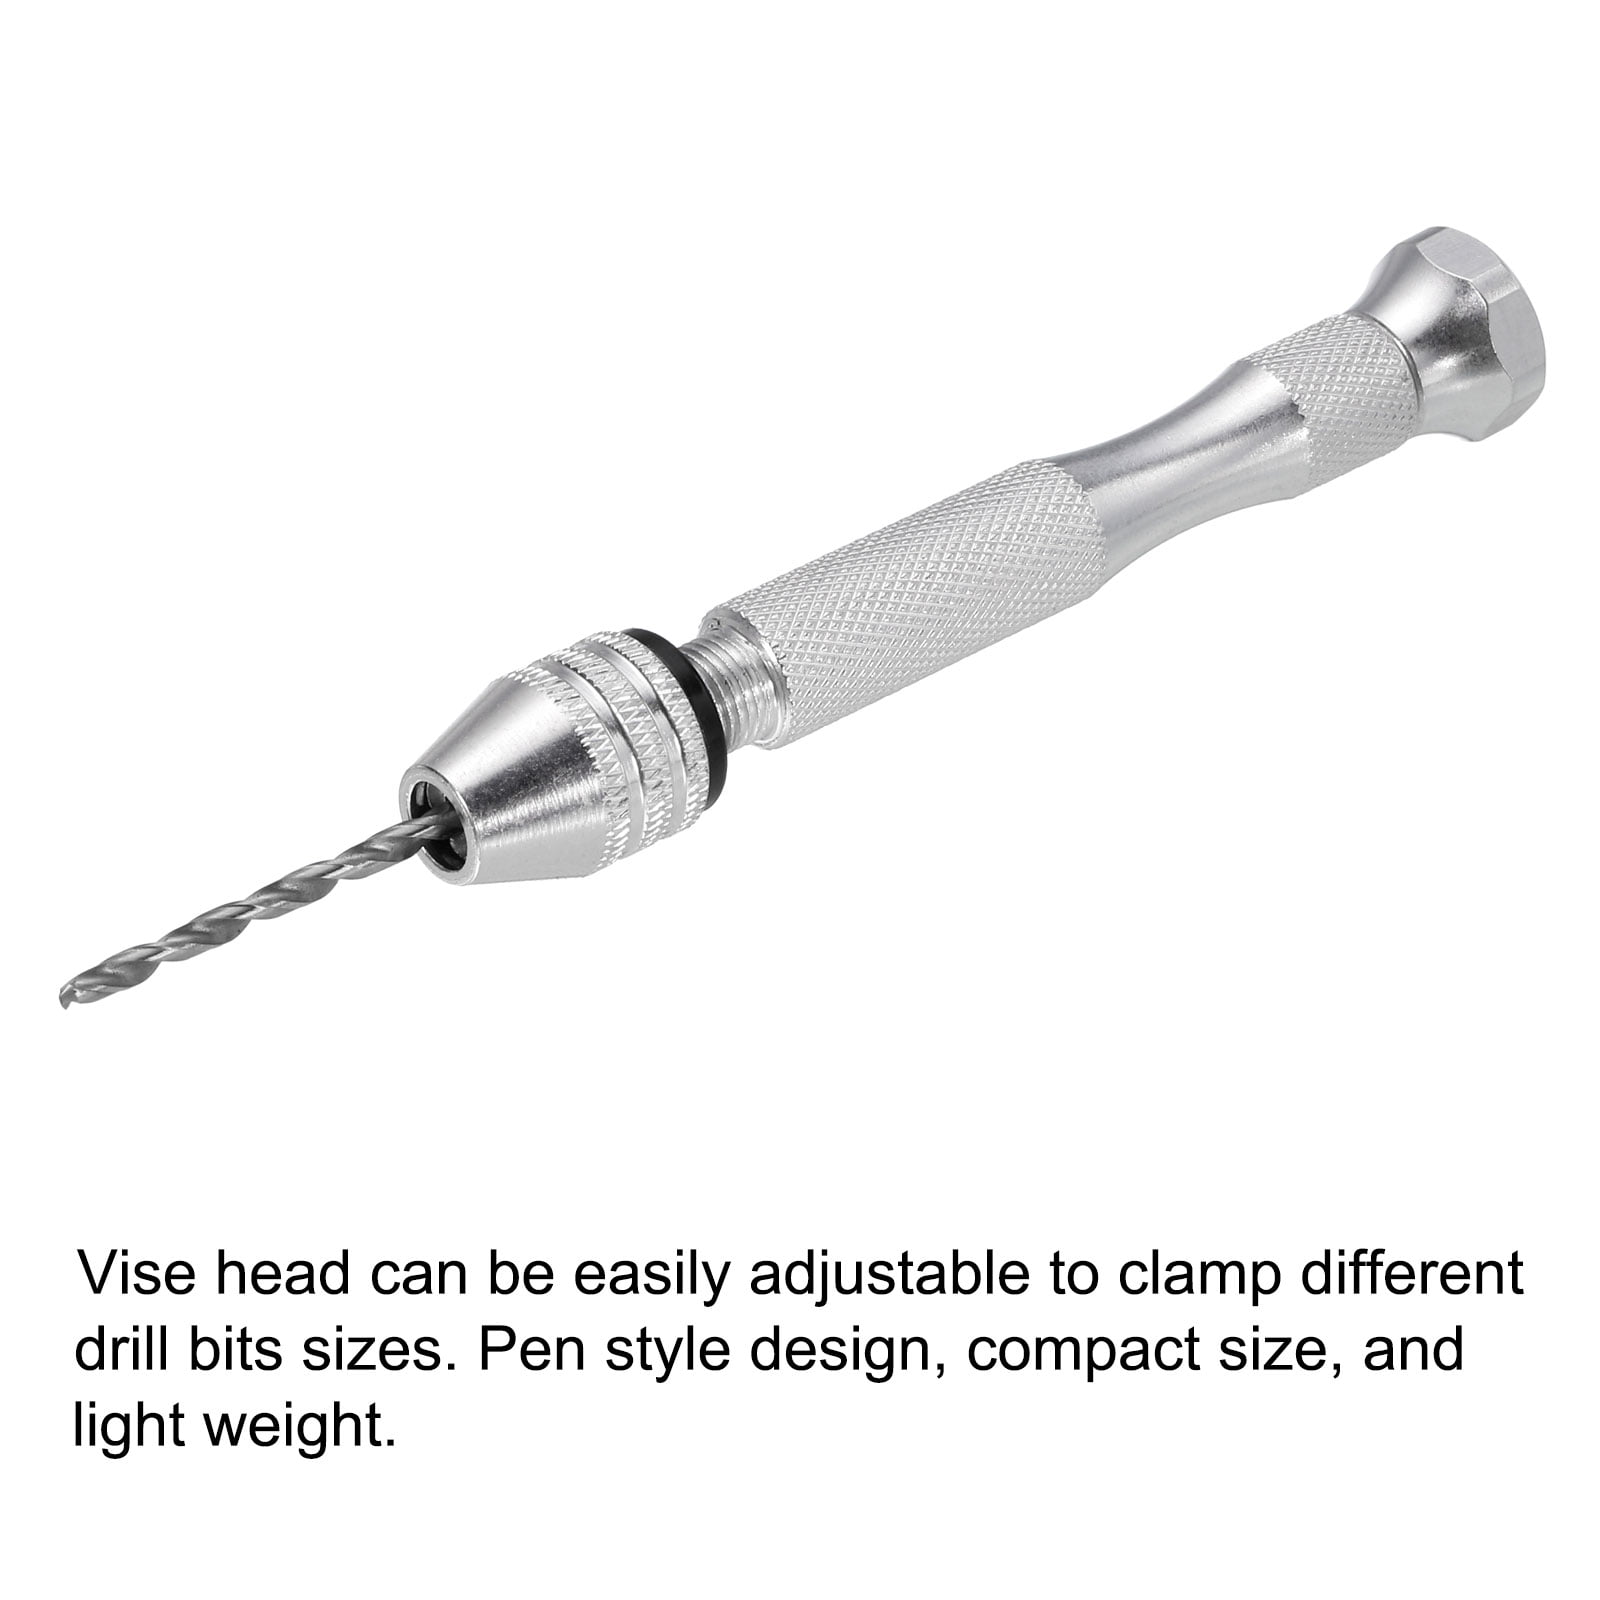 Portable Mini Hand Drill Twisted Workshop Aluminum Pin Vise Hand